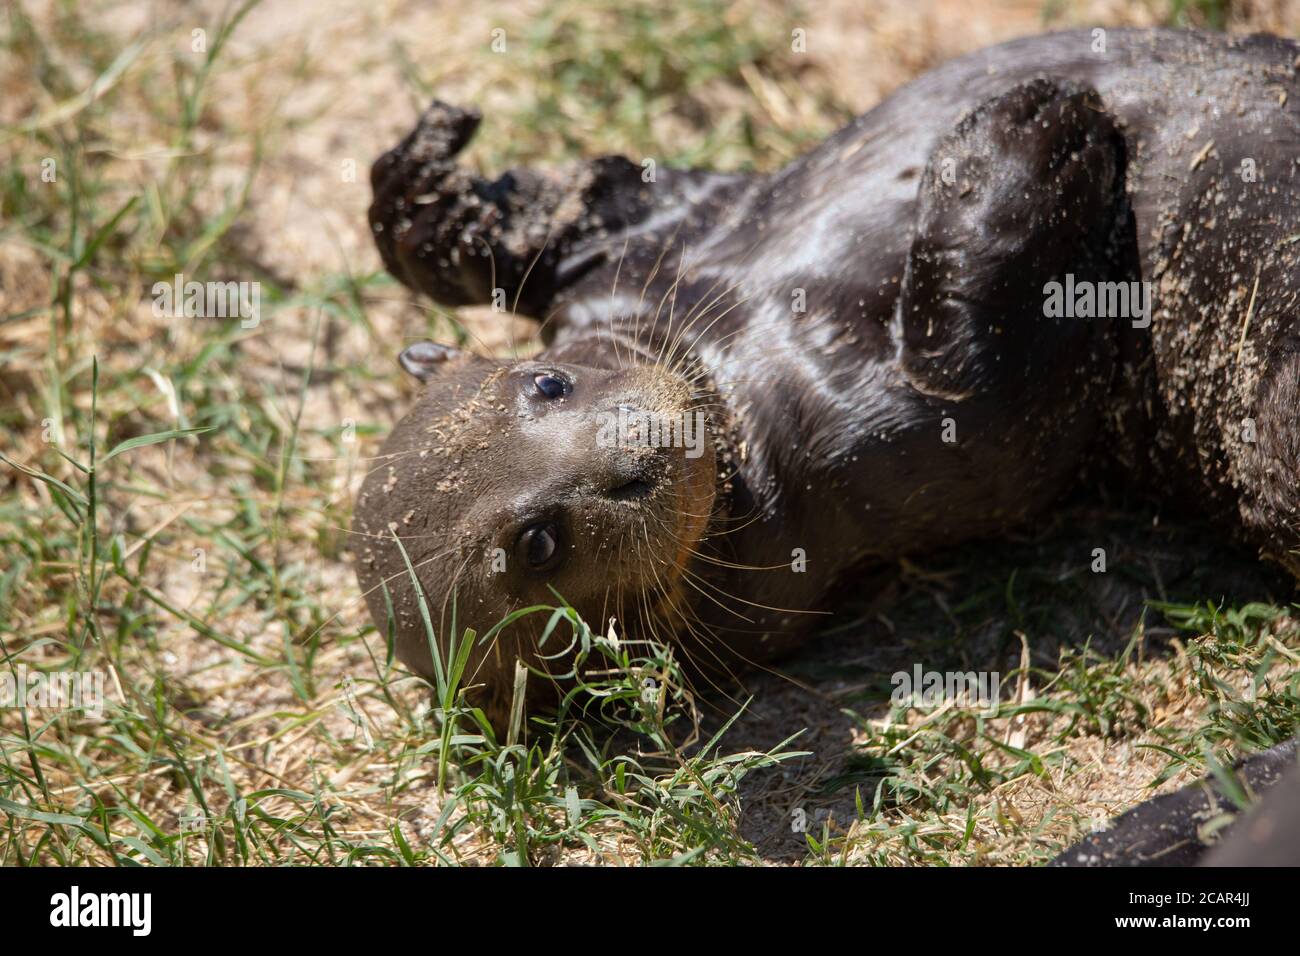 Young otter playing in the sand Stock Photo